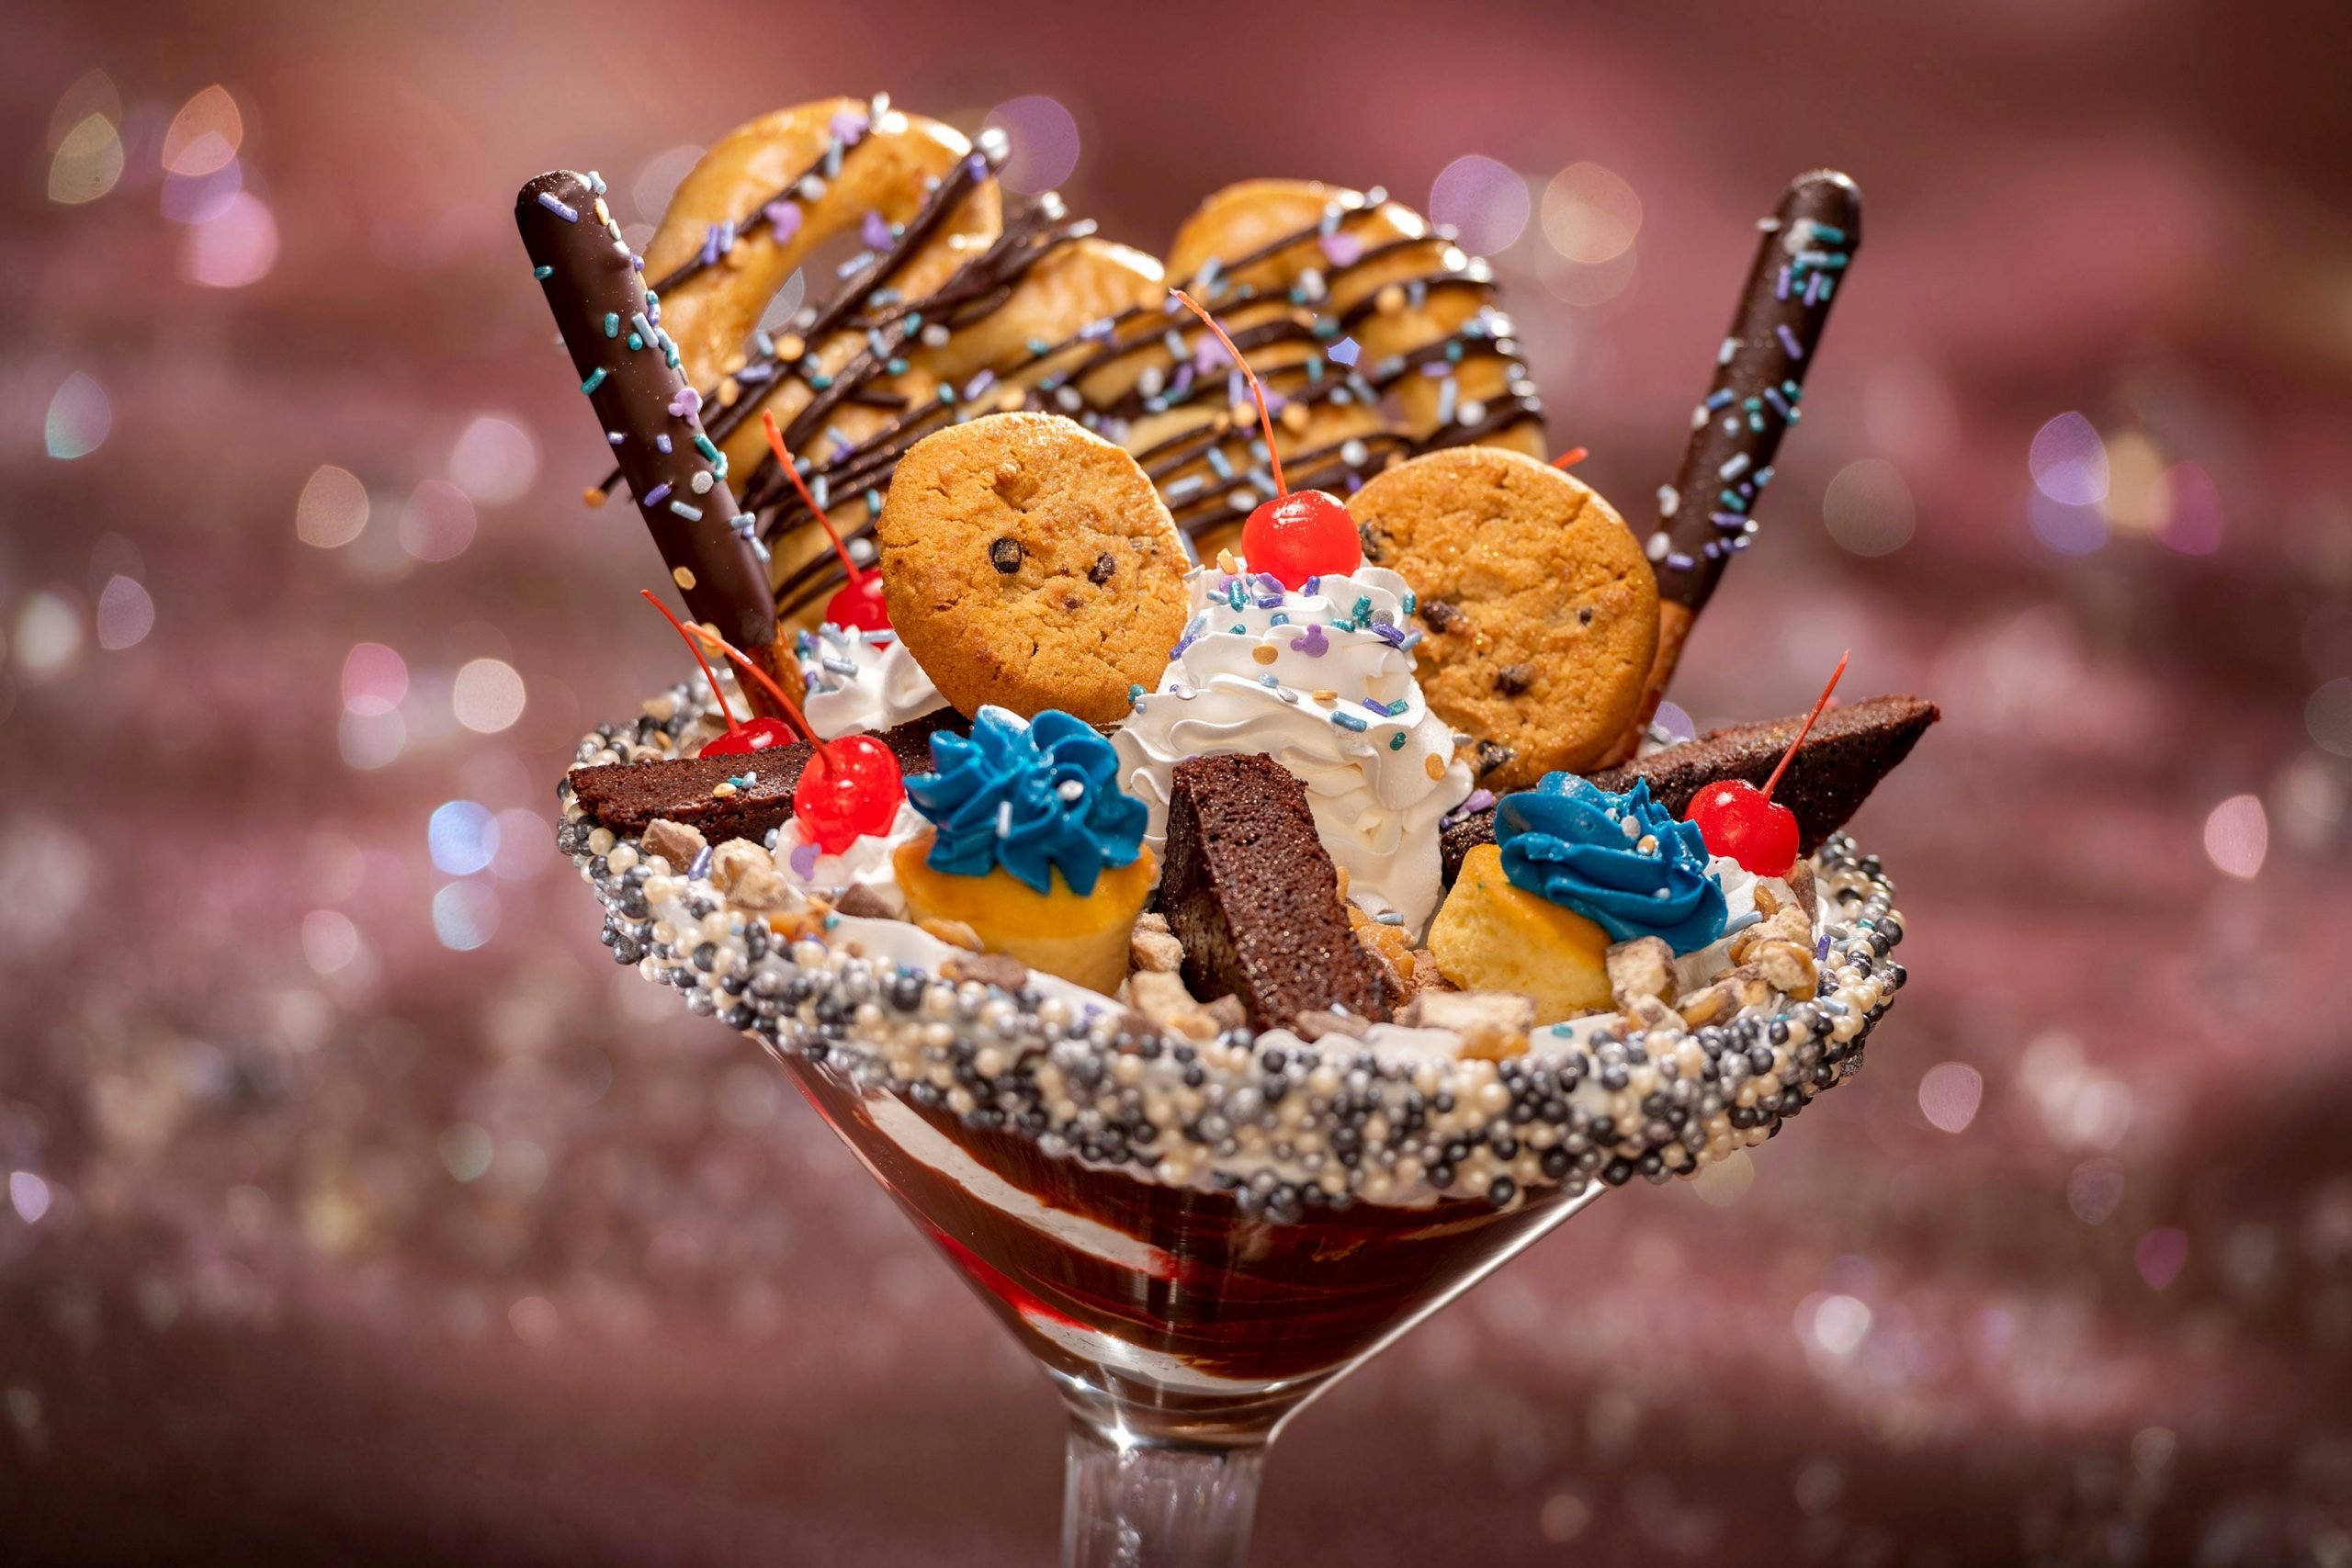 One of Disney's culinary creations, which is a chocolate-filled martini glass with a mound of miniature cookies on top.